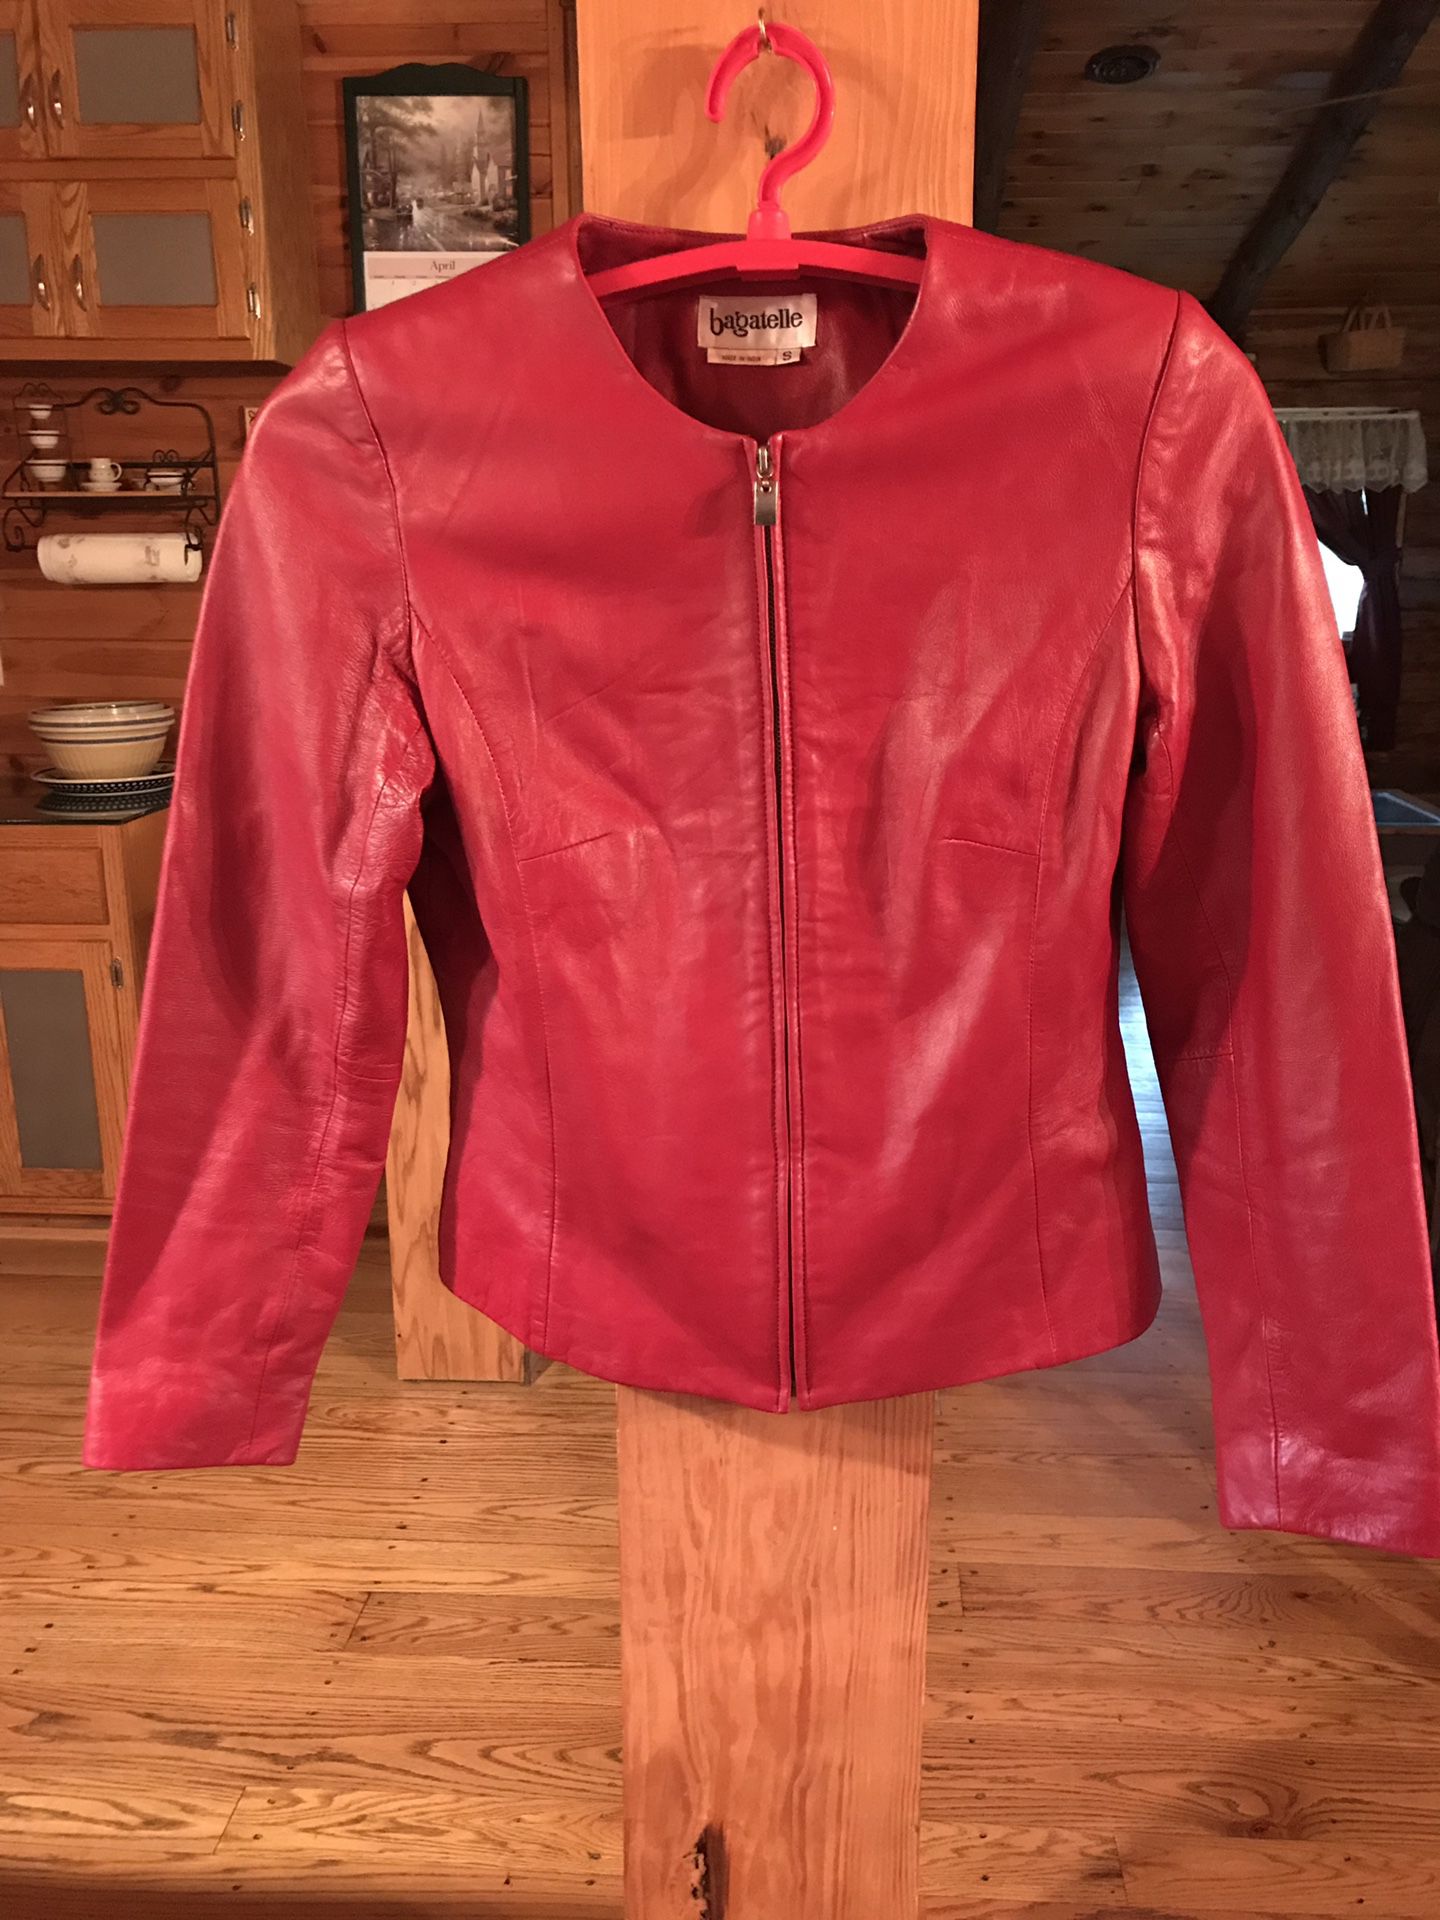 Bagatelle Red Leather Jacket